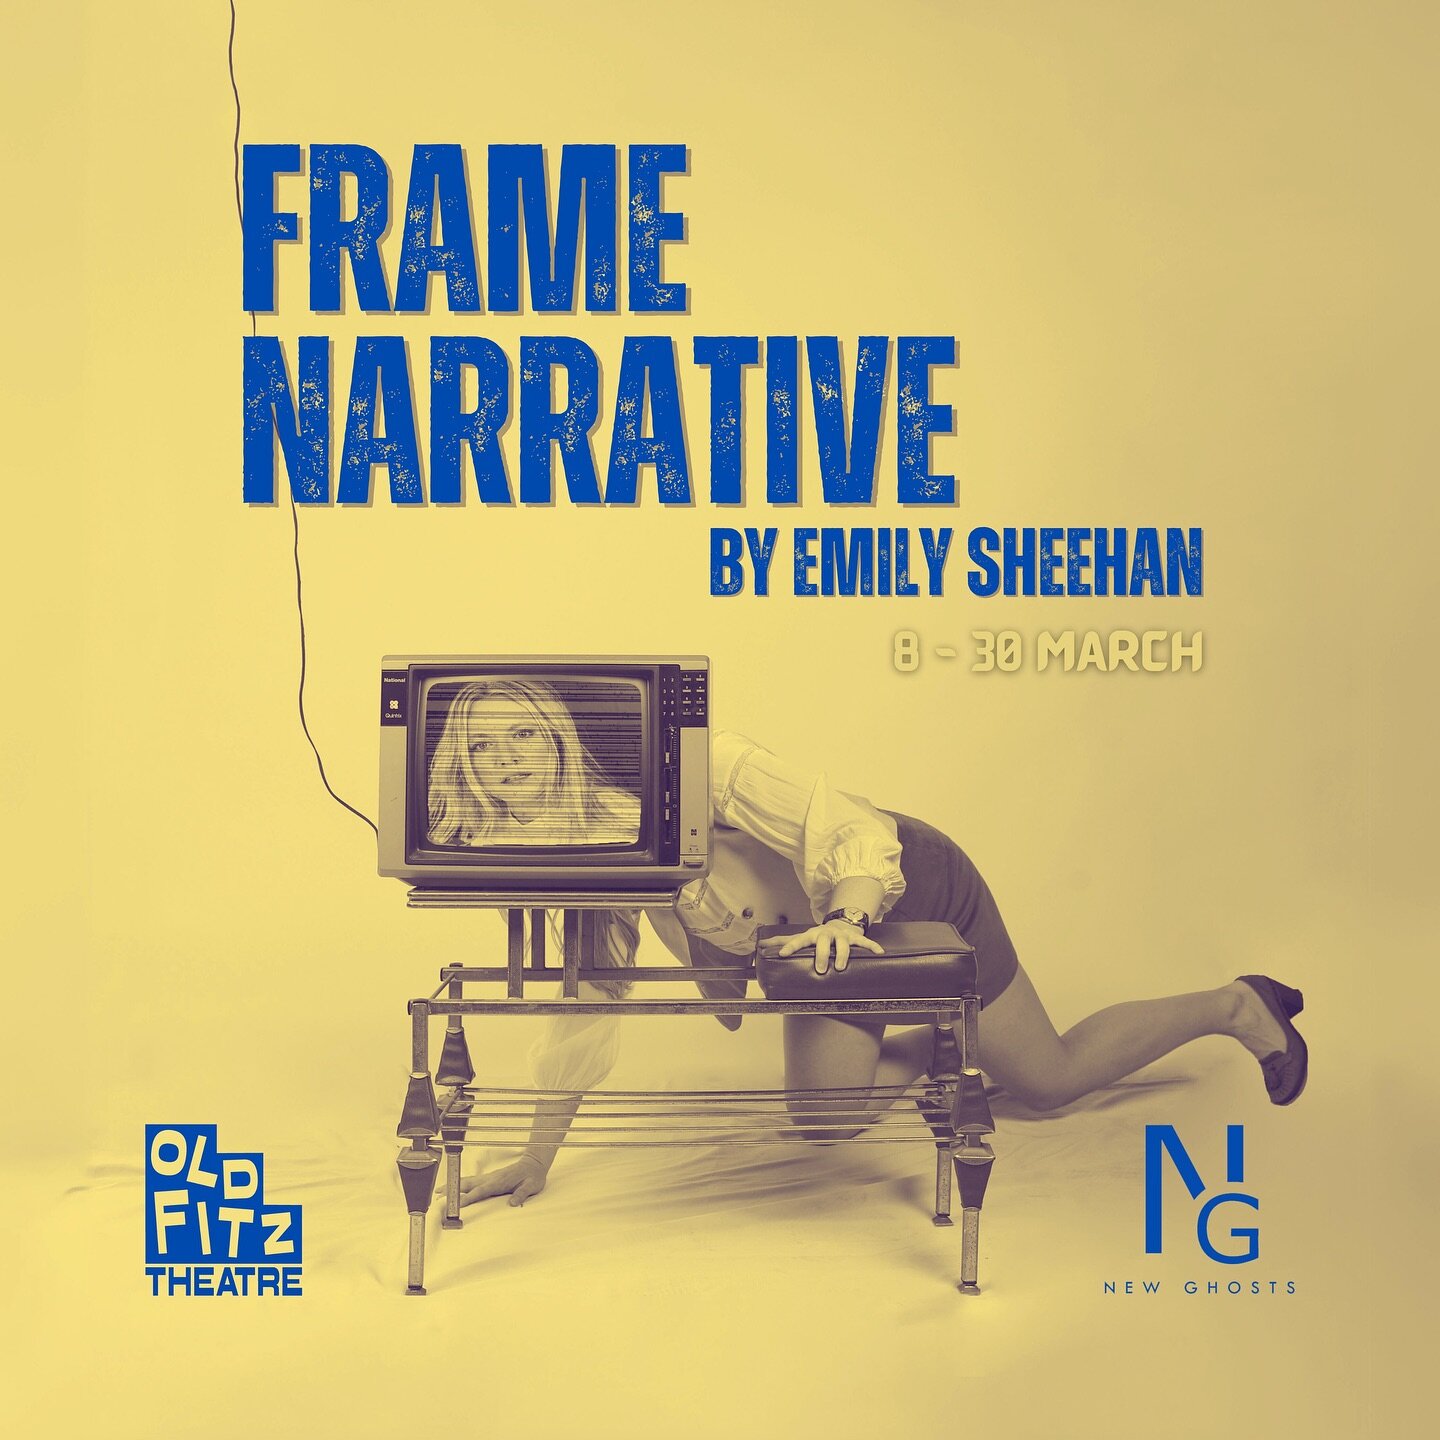 #Repost @oldfitztheatre
・・・
Concluding Act One is the world premiere of Emily Sheehan&rsquo;s new gothic thriller Frame Narrative, presented by @newghoststheatrecompany, and directed by Artistic Director of the Fitz, Lucy Clements. A metatheatrical, 